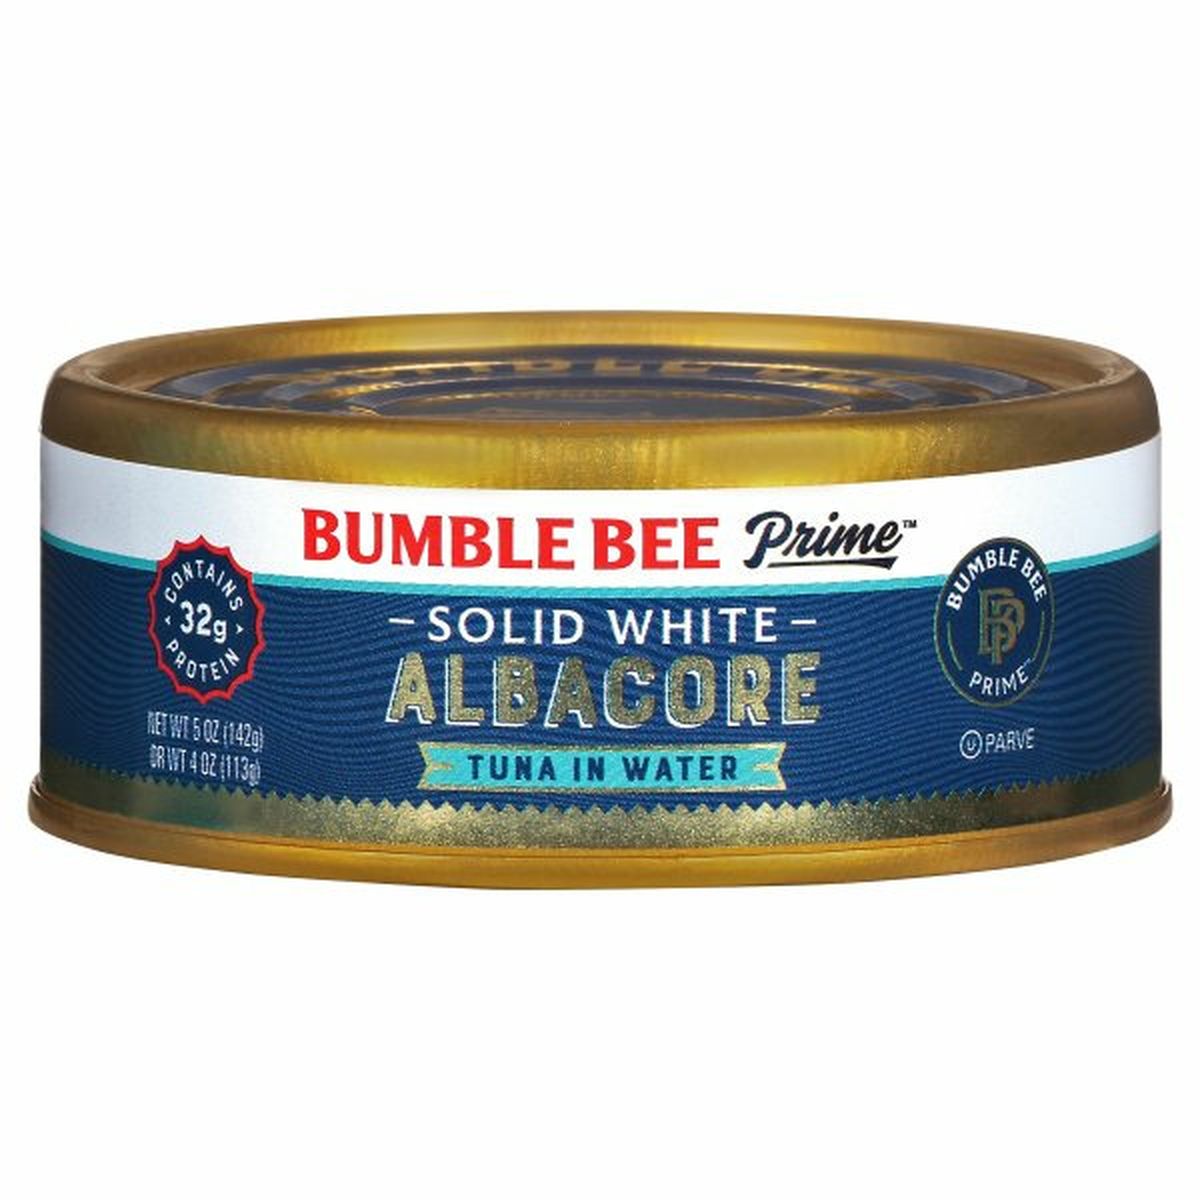 Calories in Bumble Bee Prime Tuna in Water, Albacore, Solid White